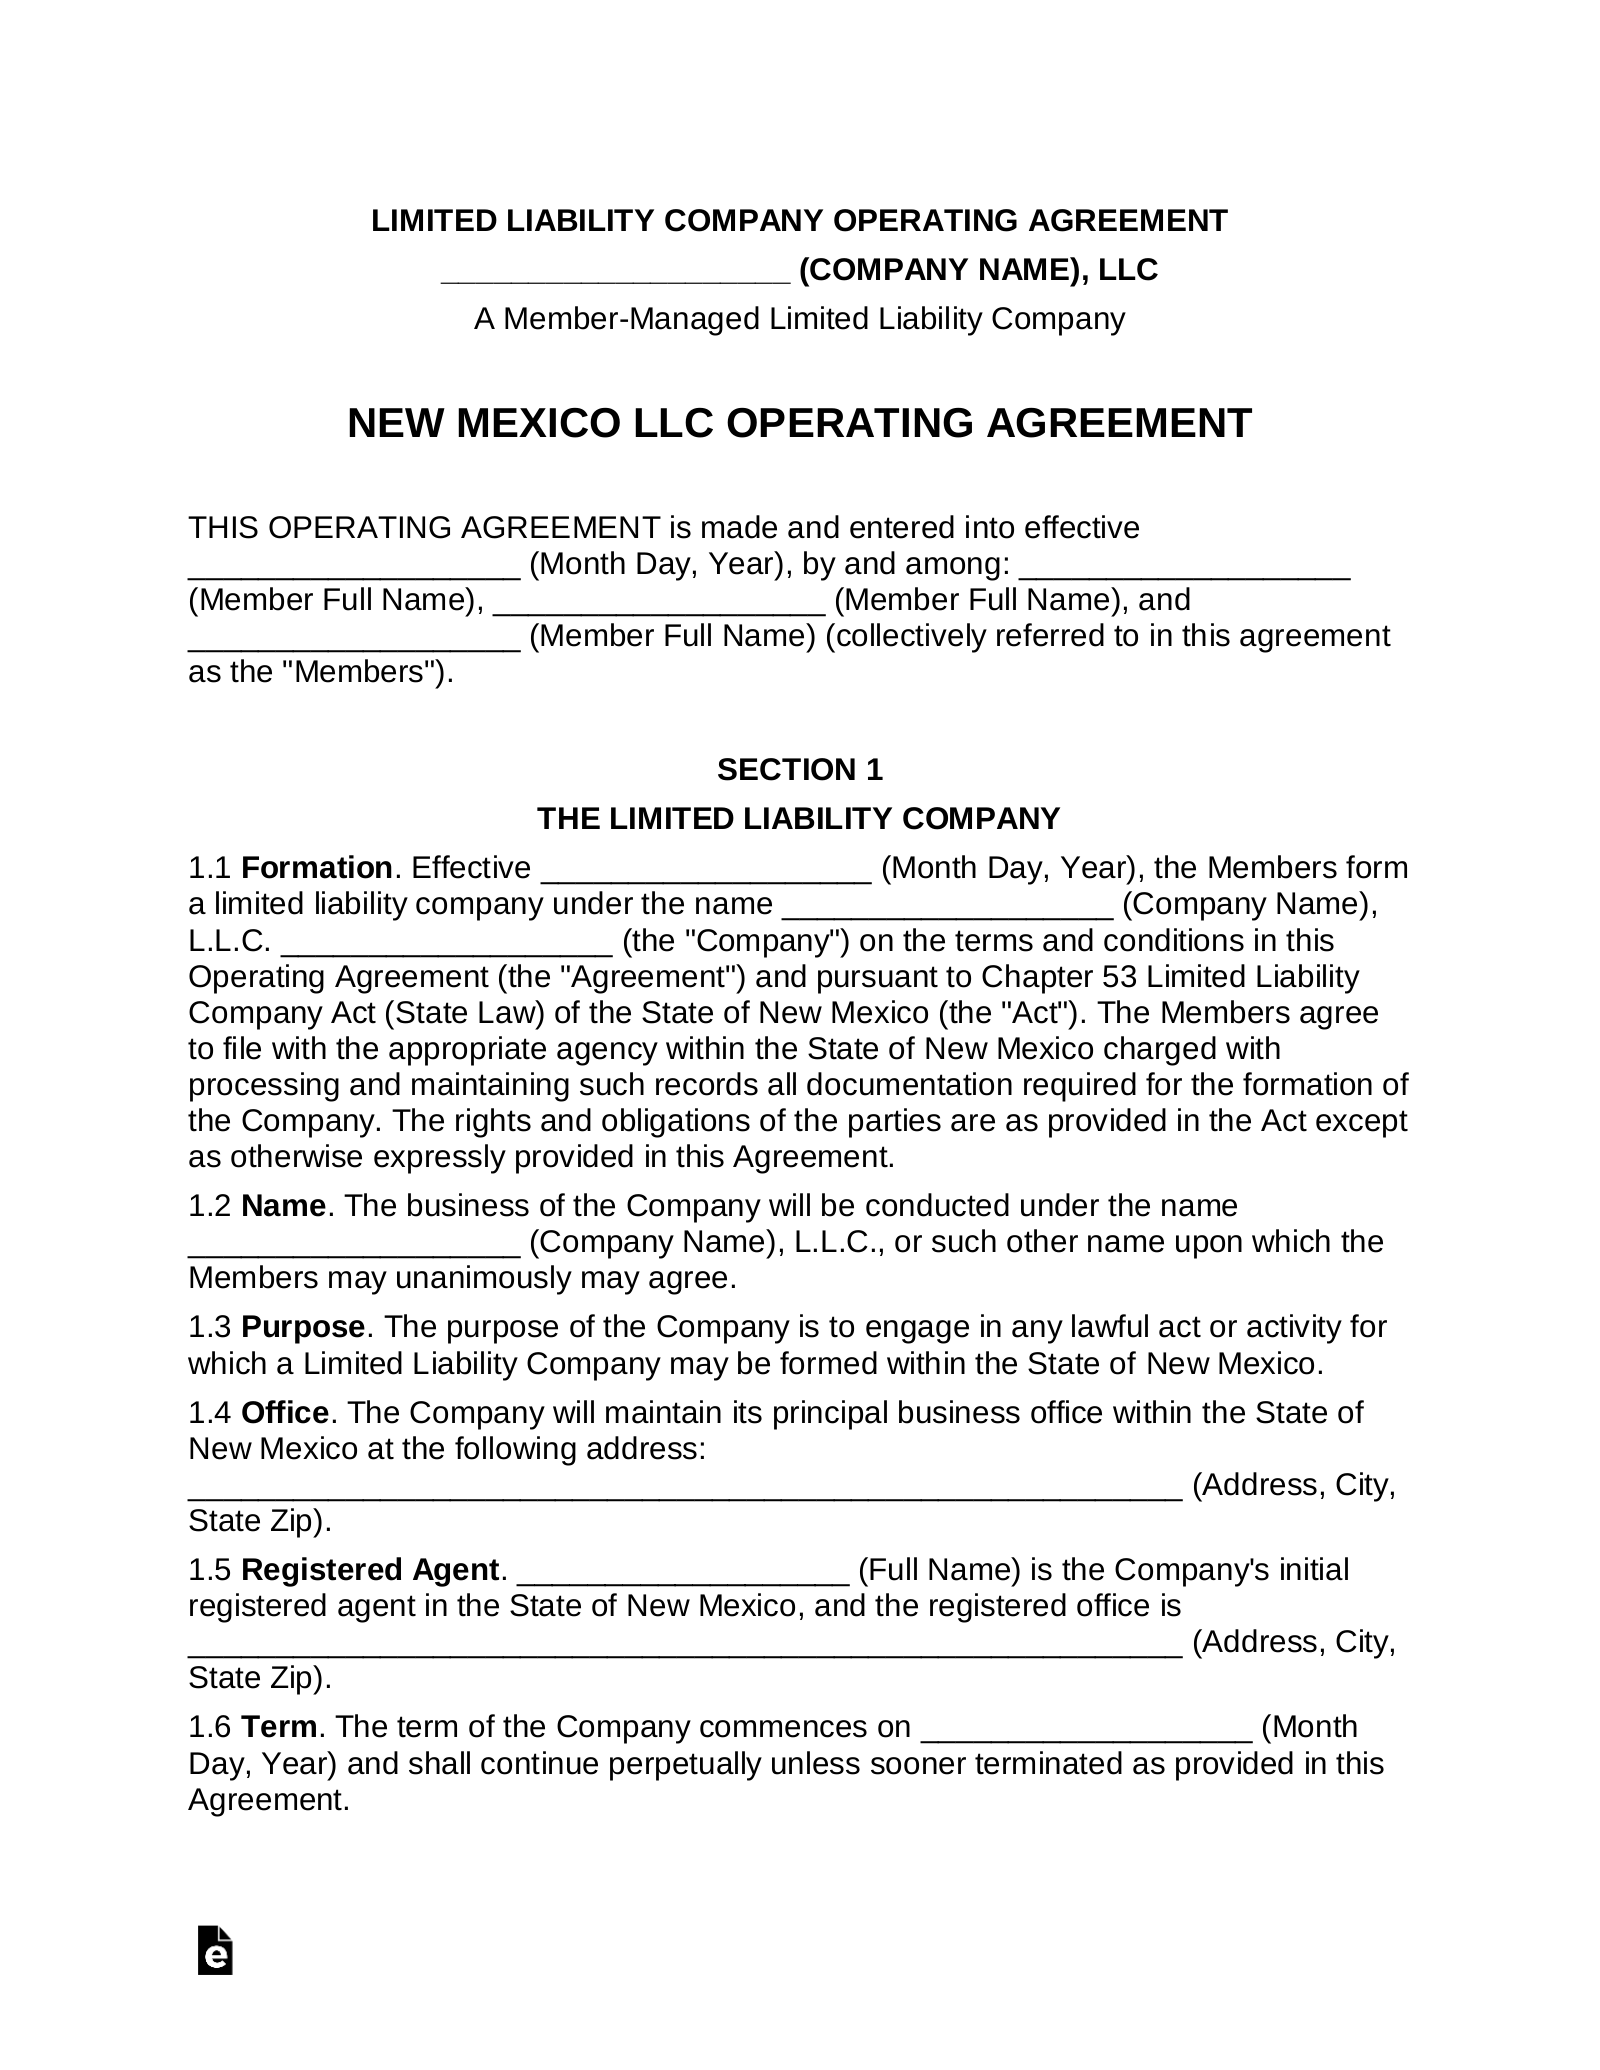 New Mexico Multi-Member LLC Operating Agreement Form